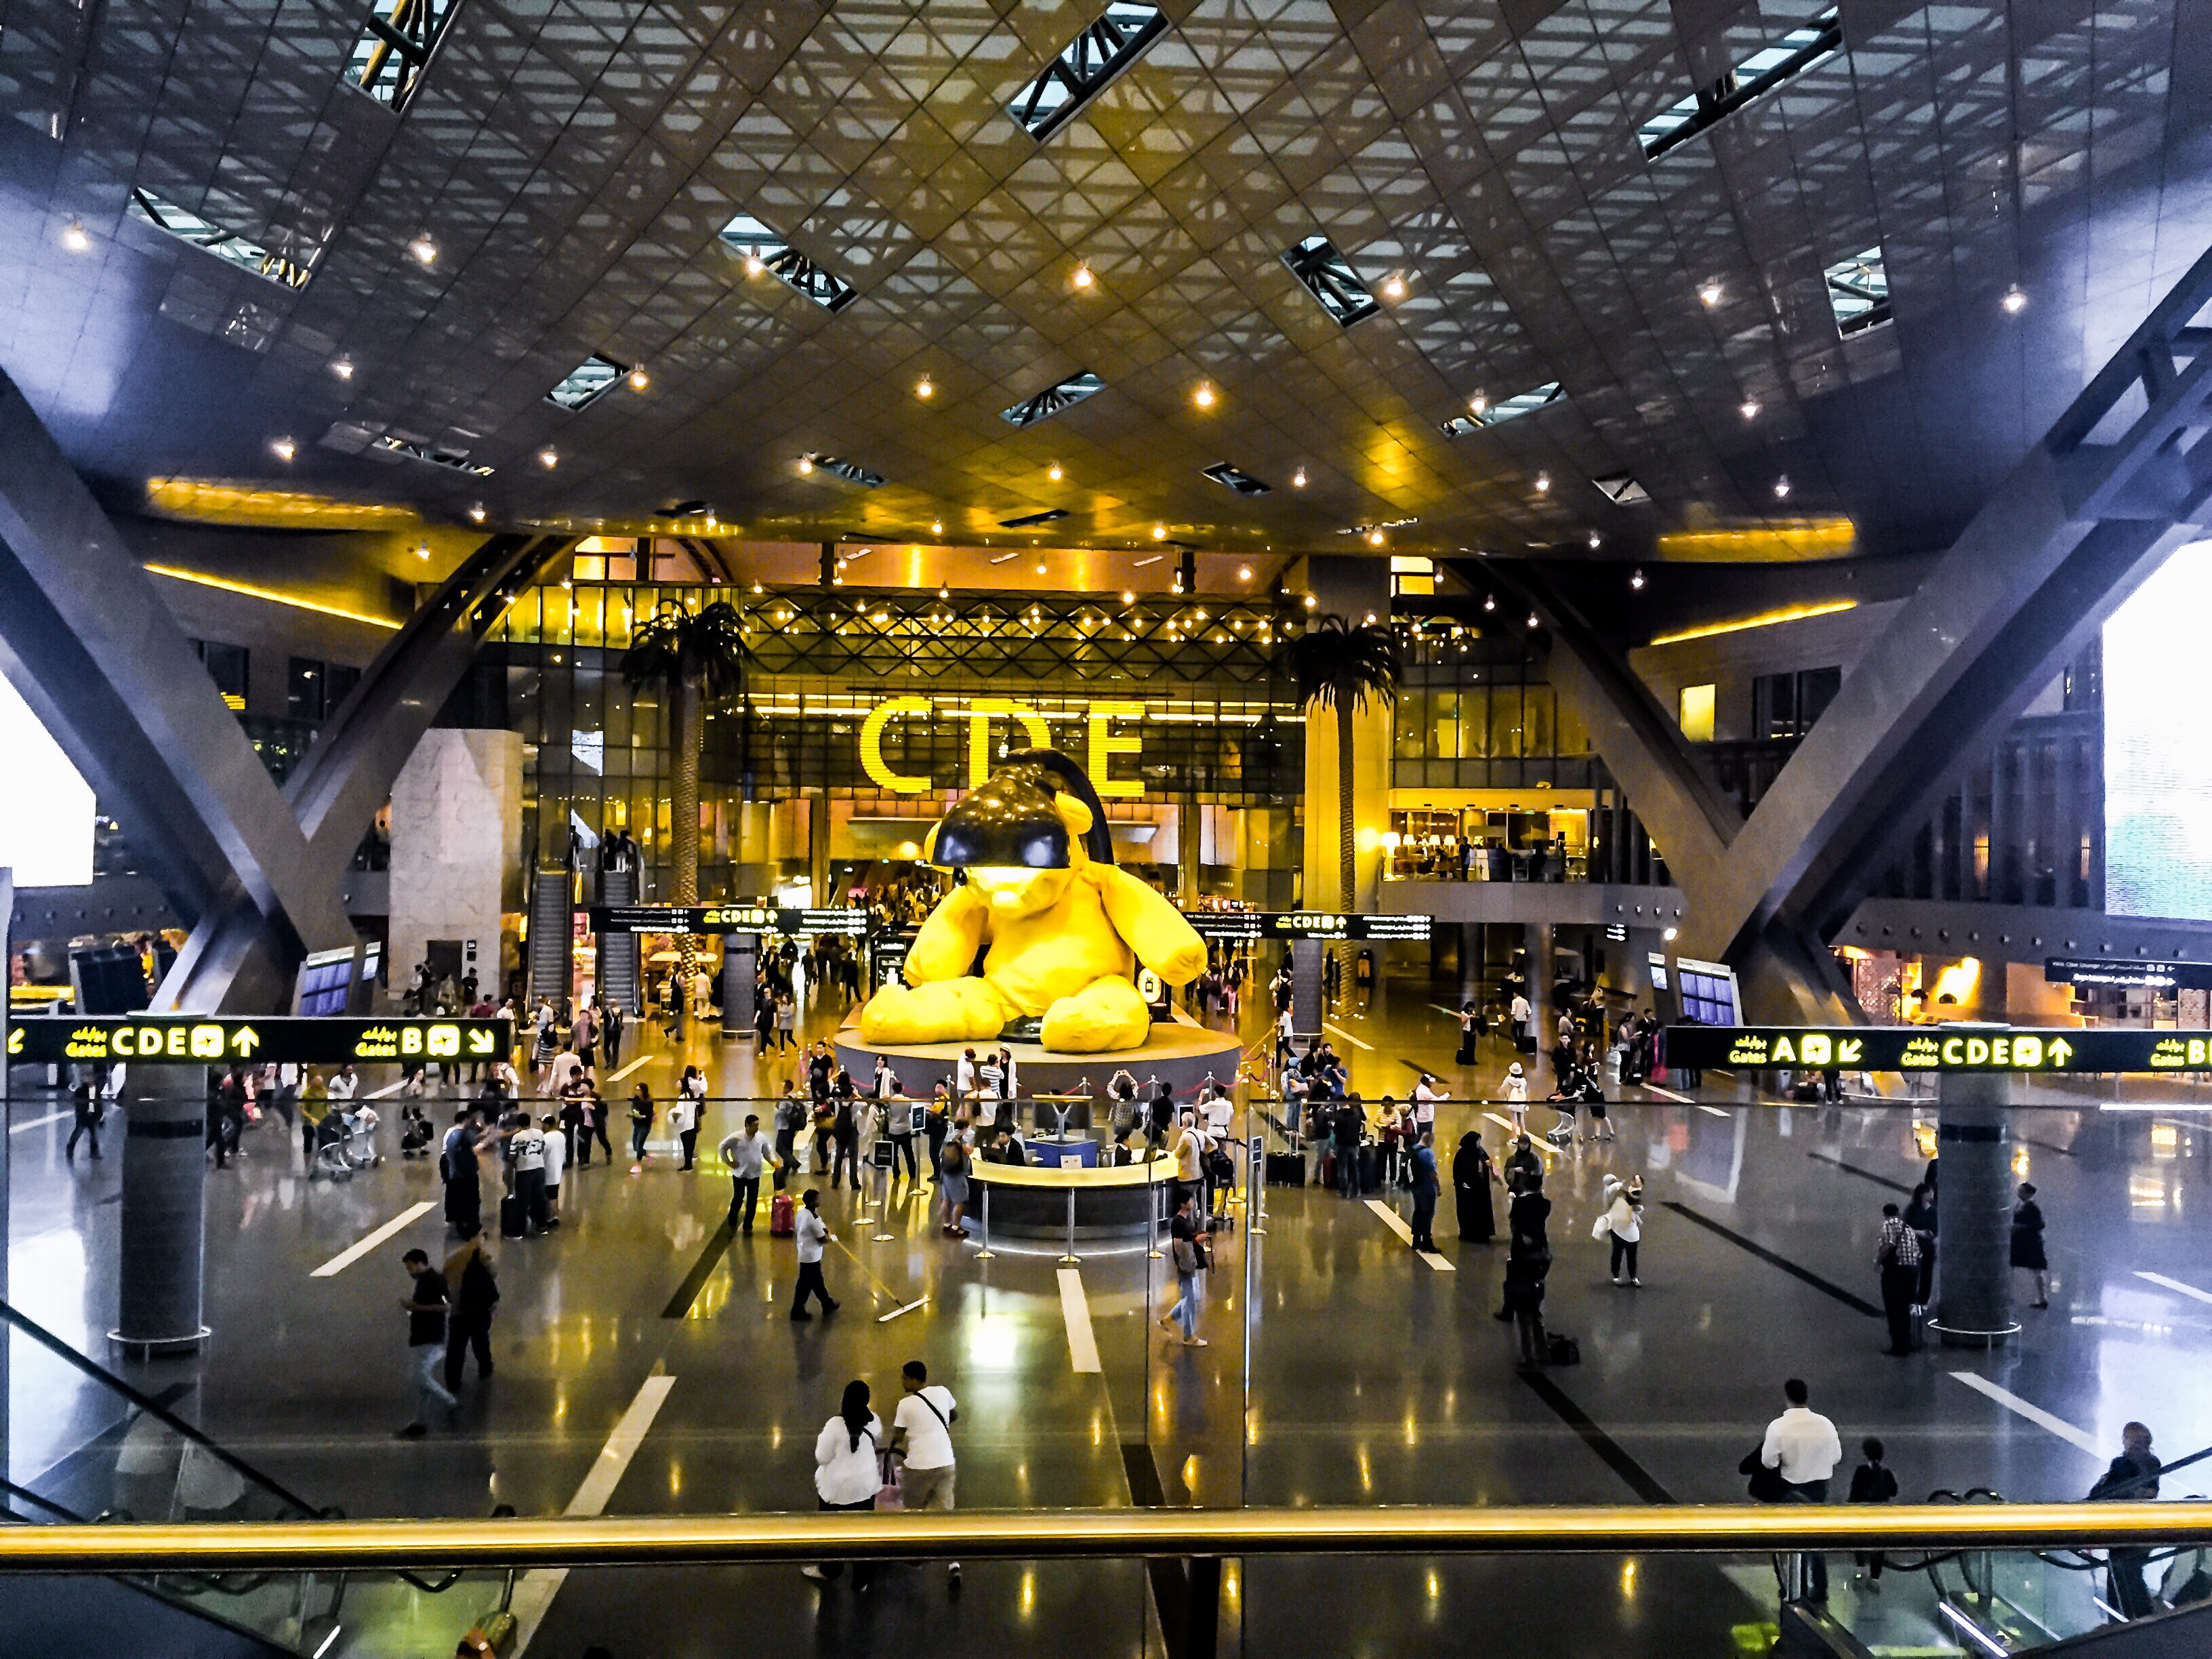 Main area of Hamad International Airport, with a giant yellow teddy bear statue in the center. (Mila J—Getty Images)